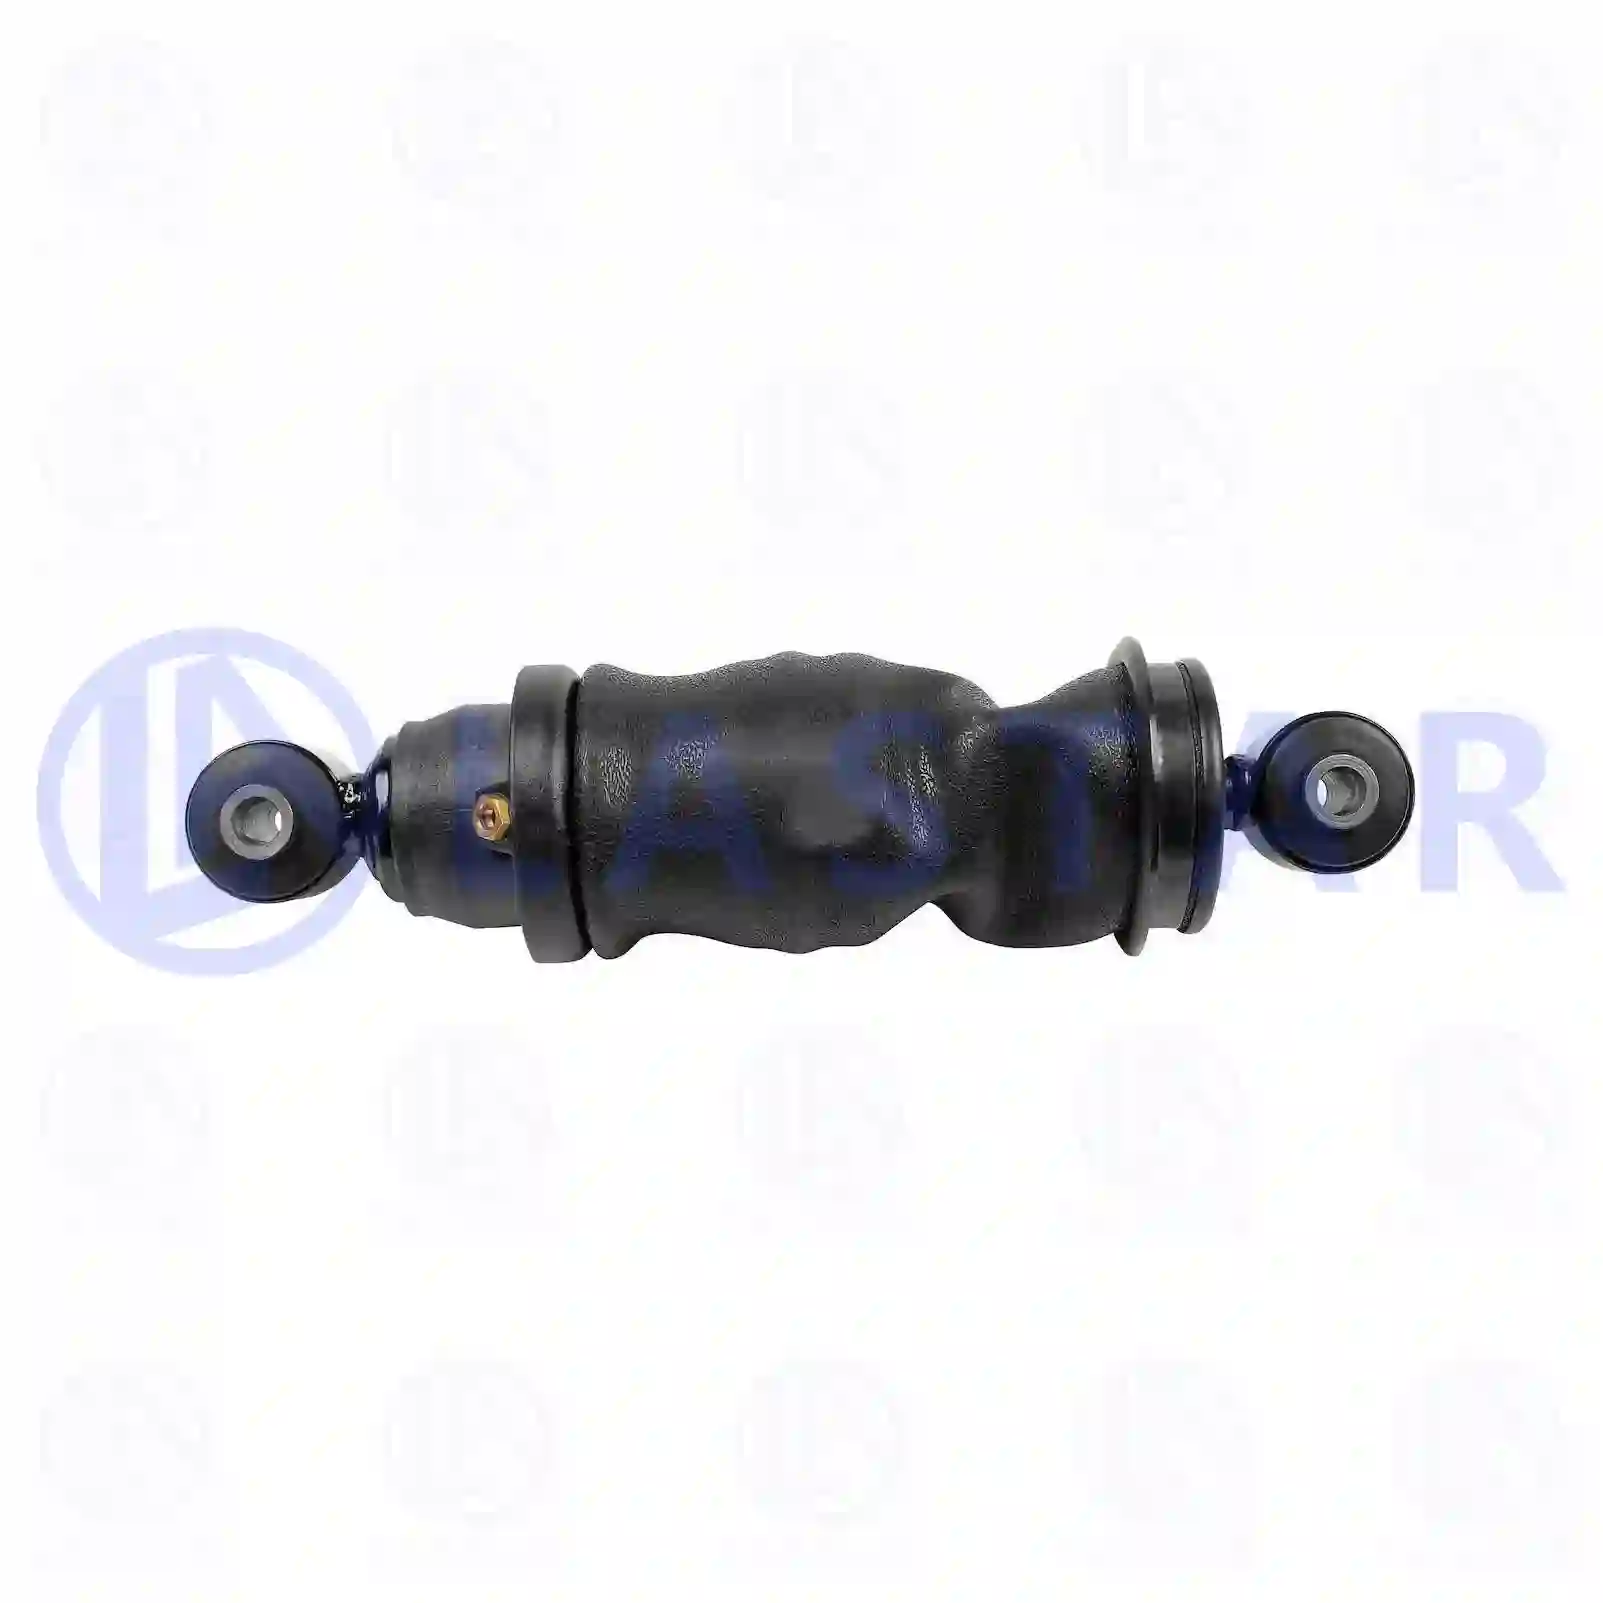 Cabin shock absorber, with air bellow, 77734902, 9428906119, , , ||  77734902 Lastar Spare Part | Truck Spare Parts, Auotomotive Spare Parts Cabin shock absorber, with air bellow, 77734902, 9428906119, , , ||  77734902 Lastar Spare Part | Truck Spare Parts, Auotomotive Spare Parts